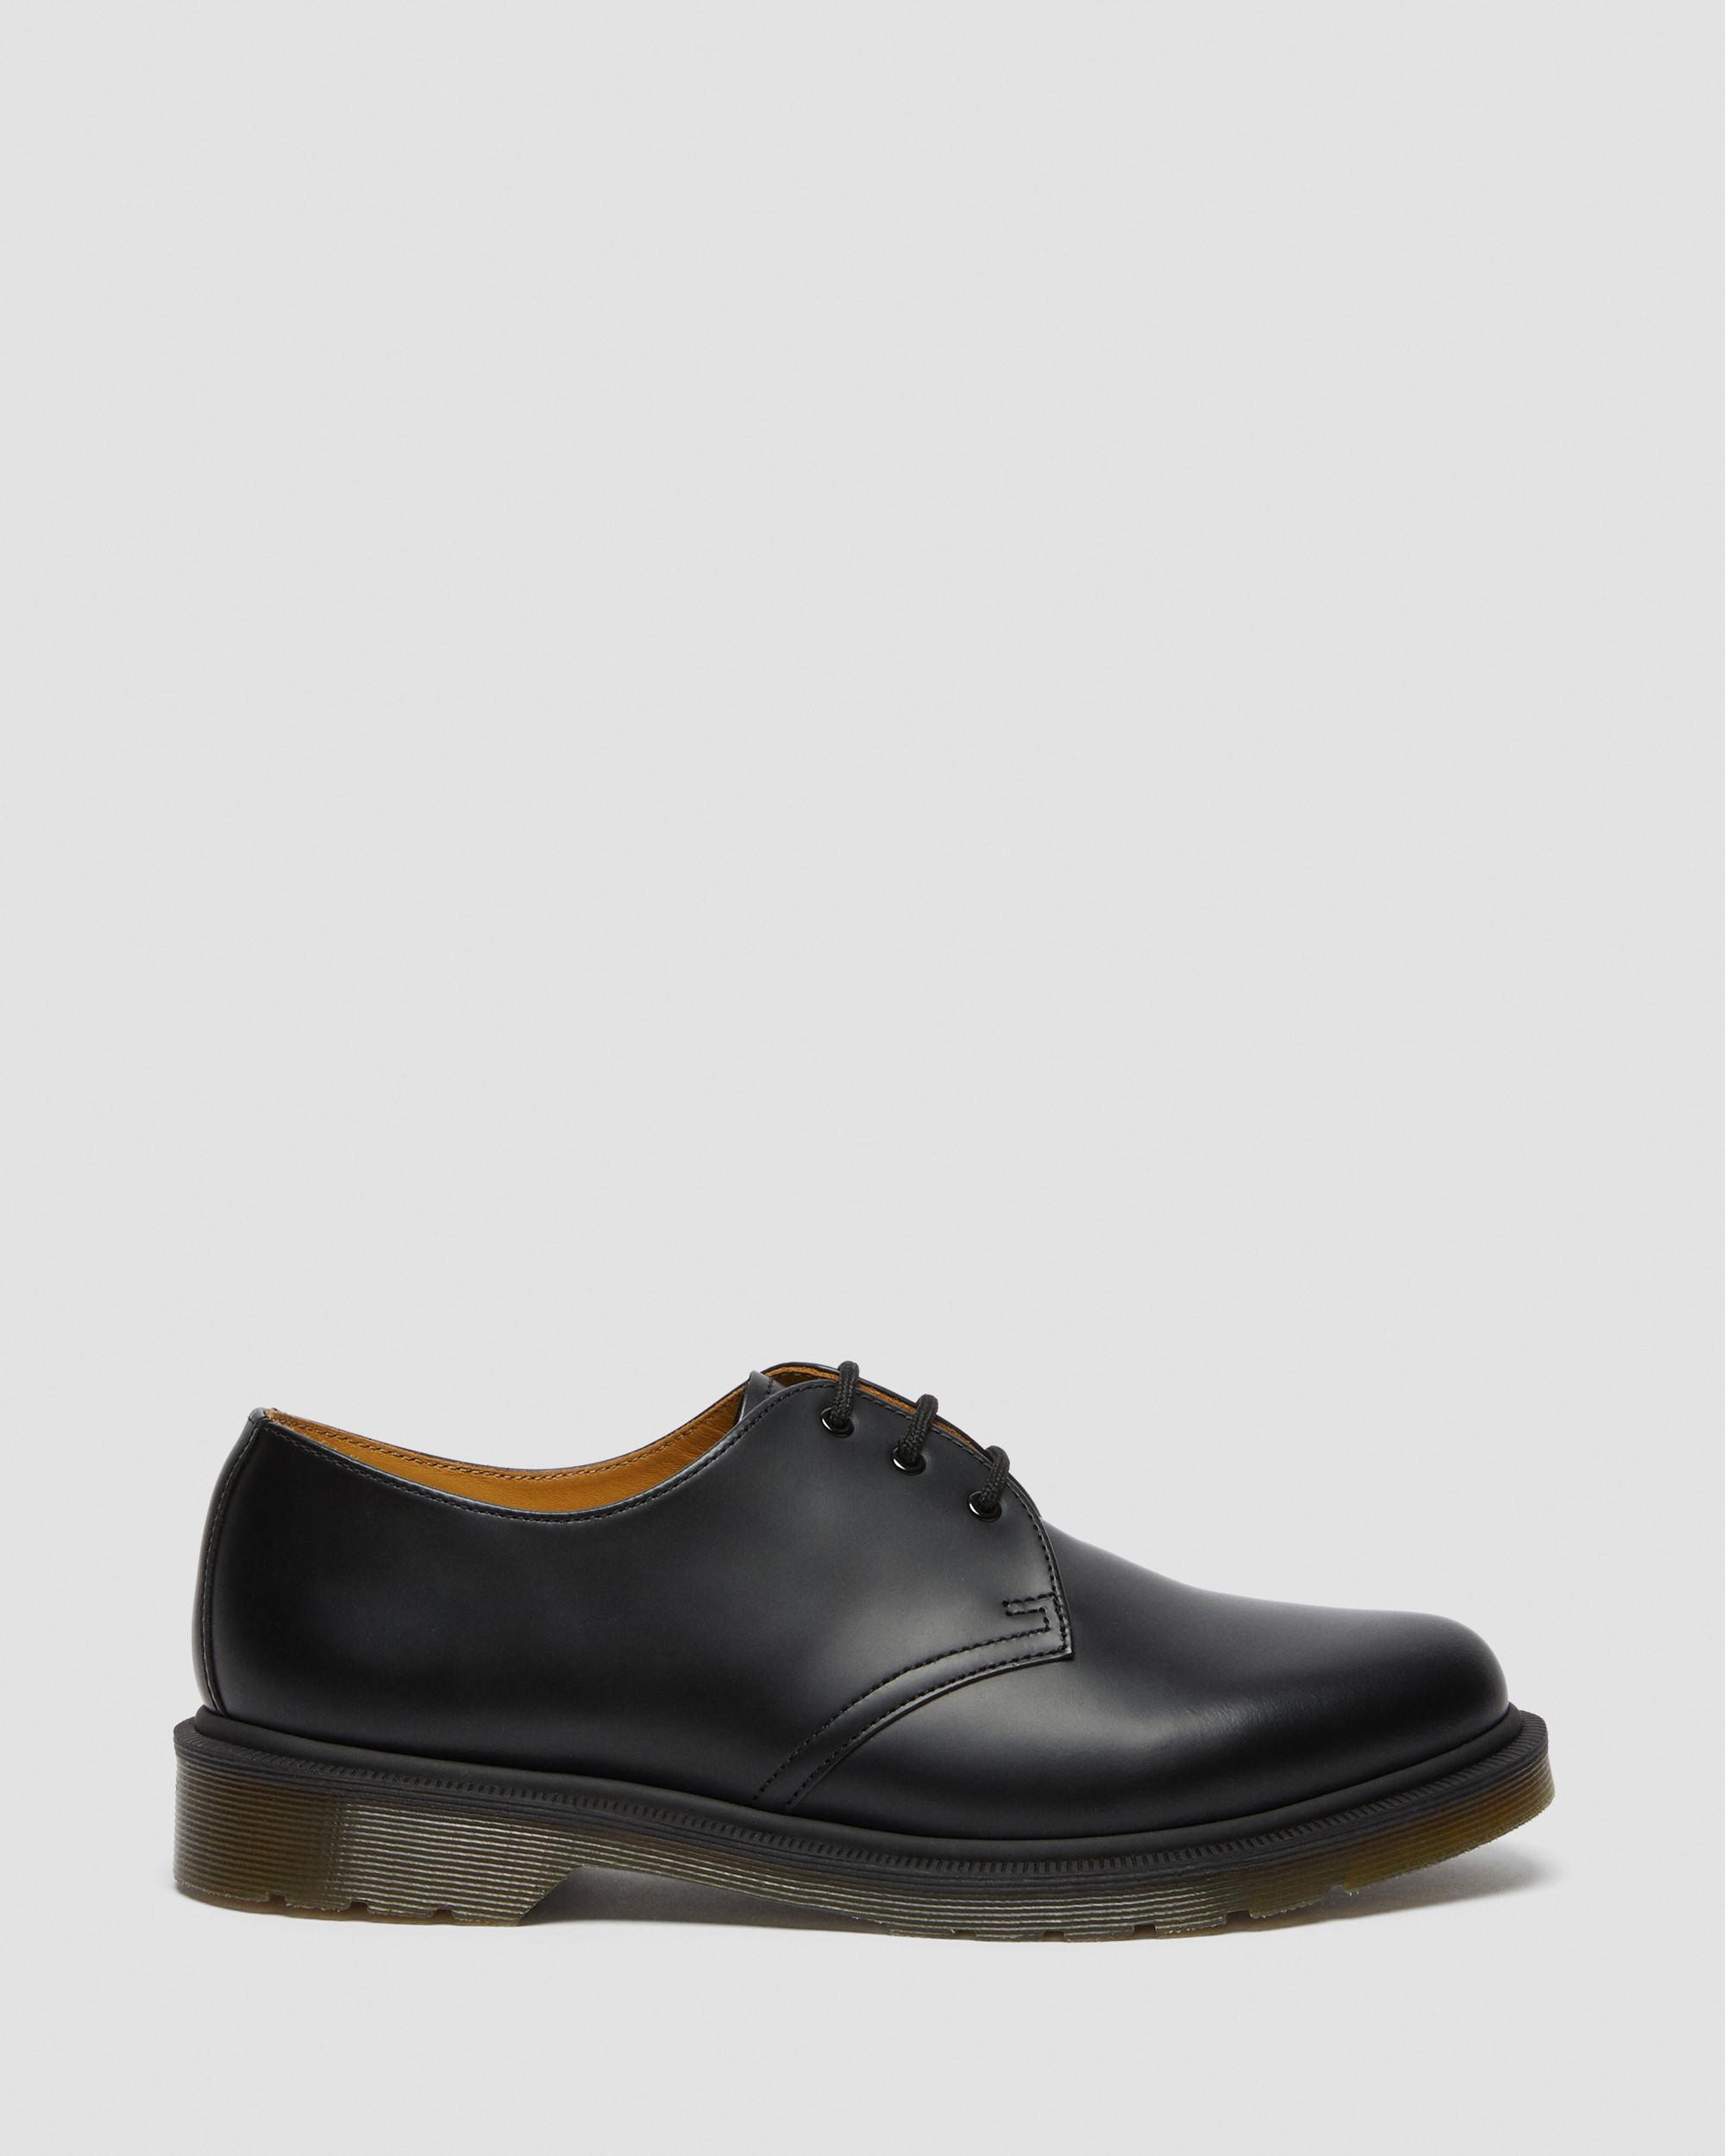 1461 Narrow Plain Welt Smooth Leather Oxford Shoes in Black | Dr. Martens